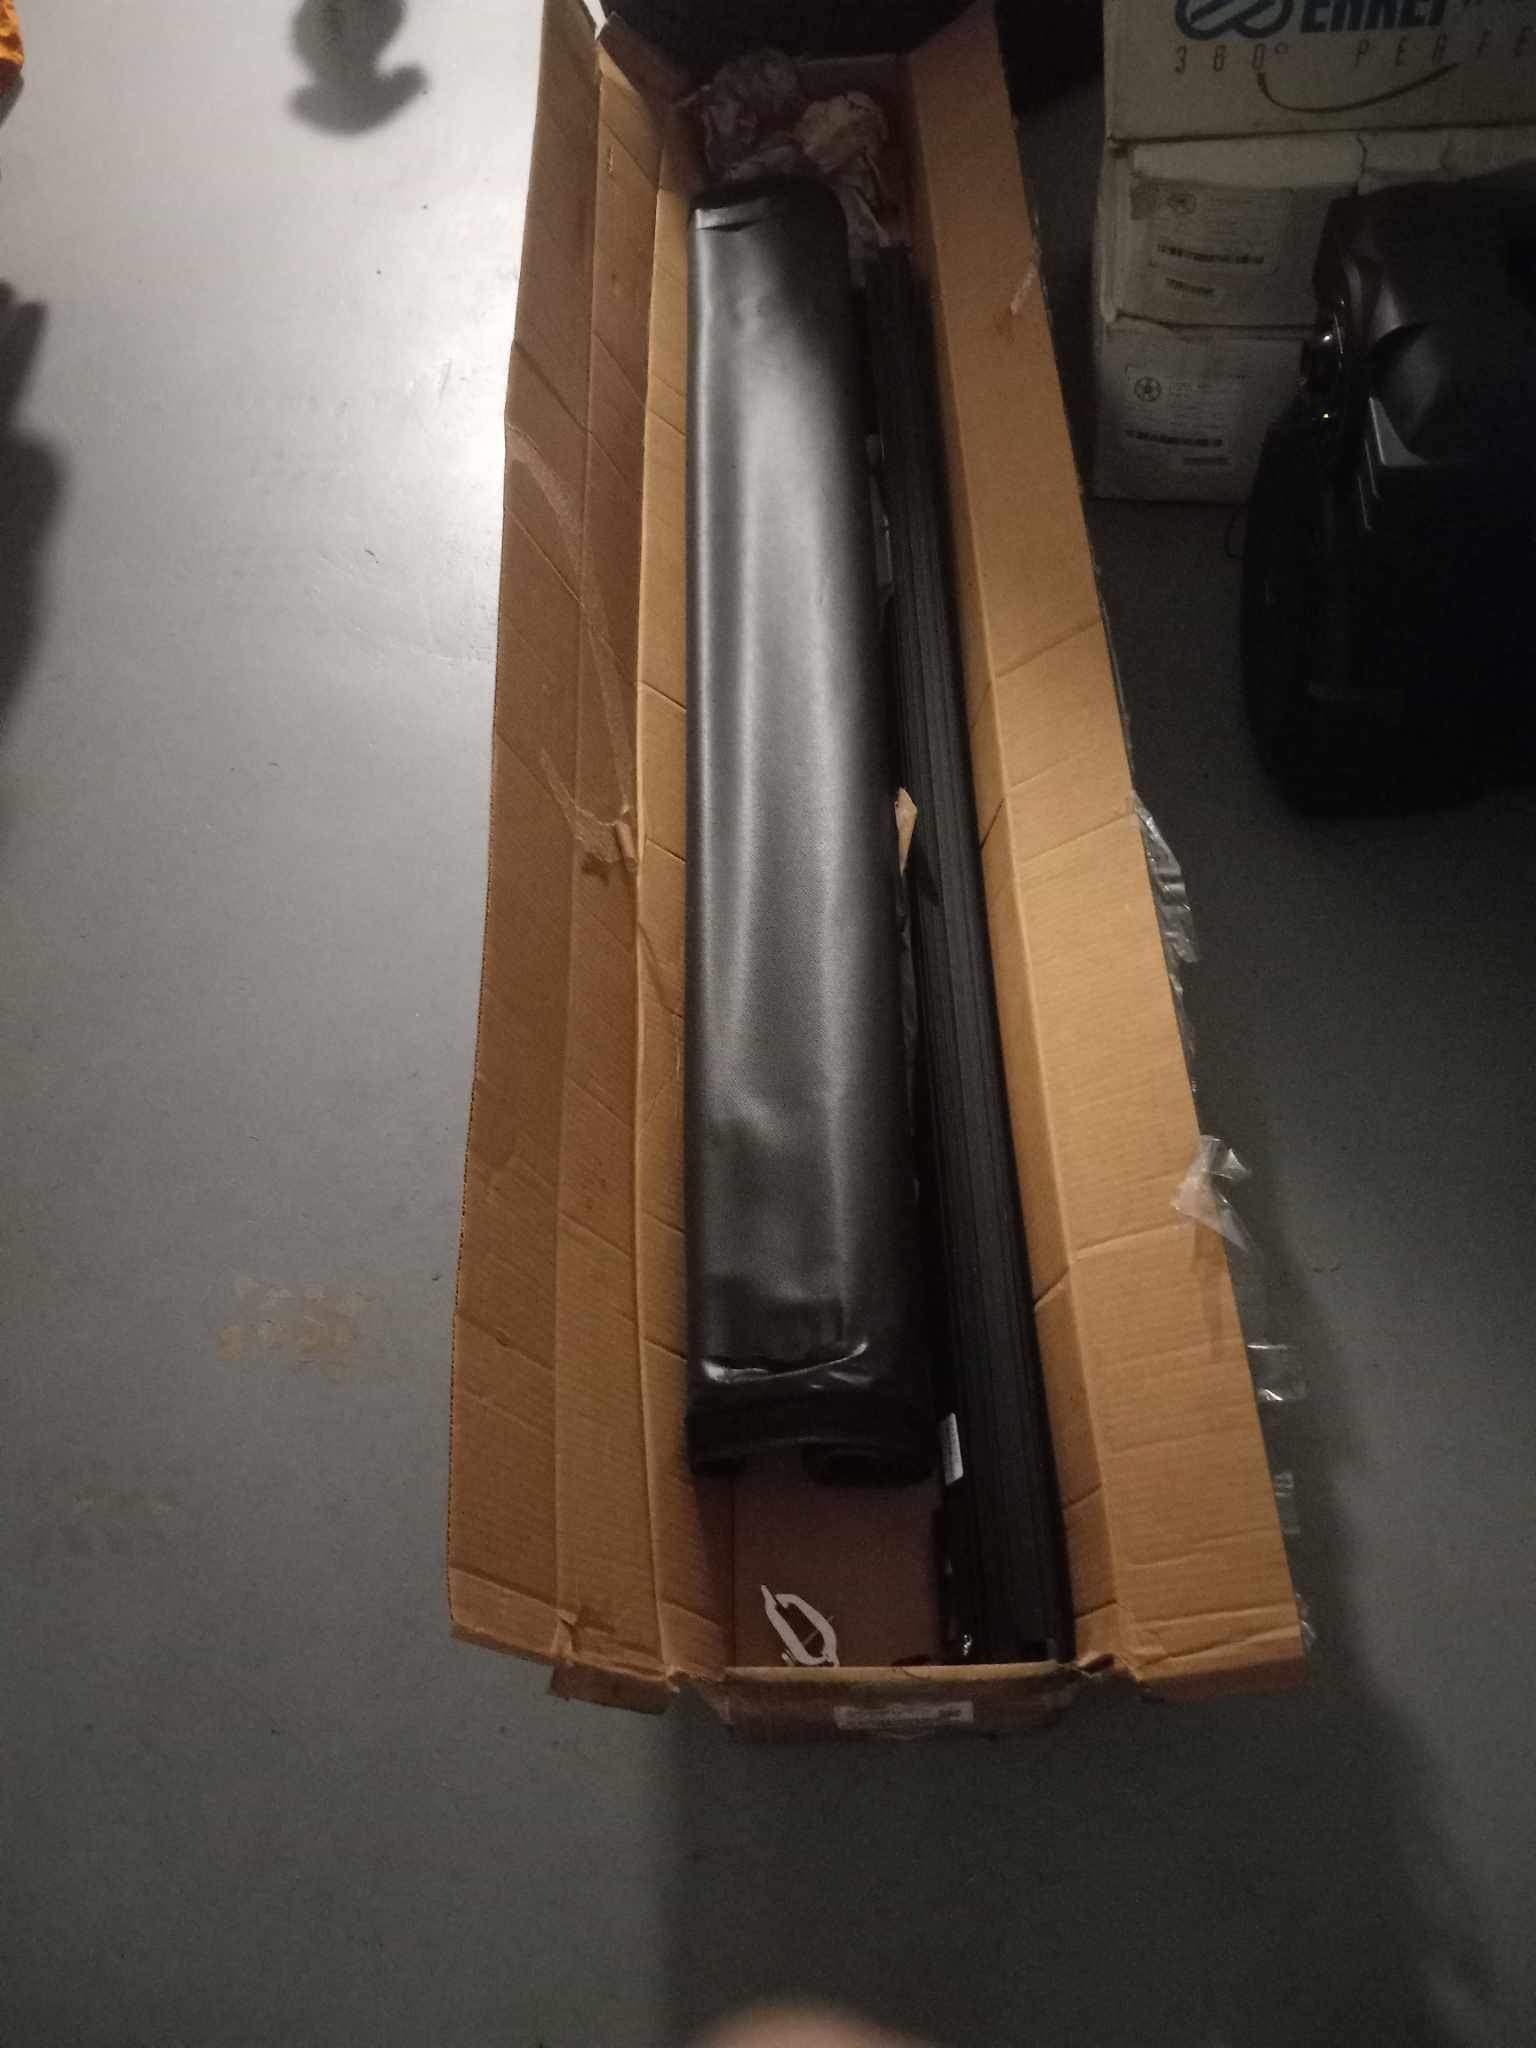 F-150 Running Boards New In The Box New Used Fits 2015-2020